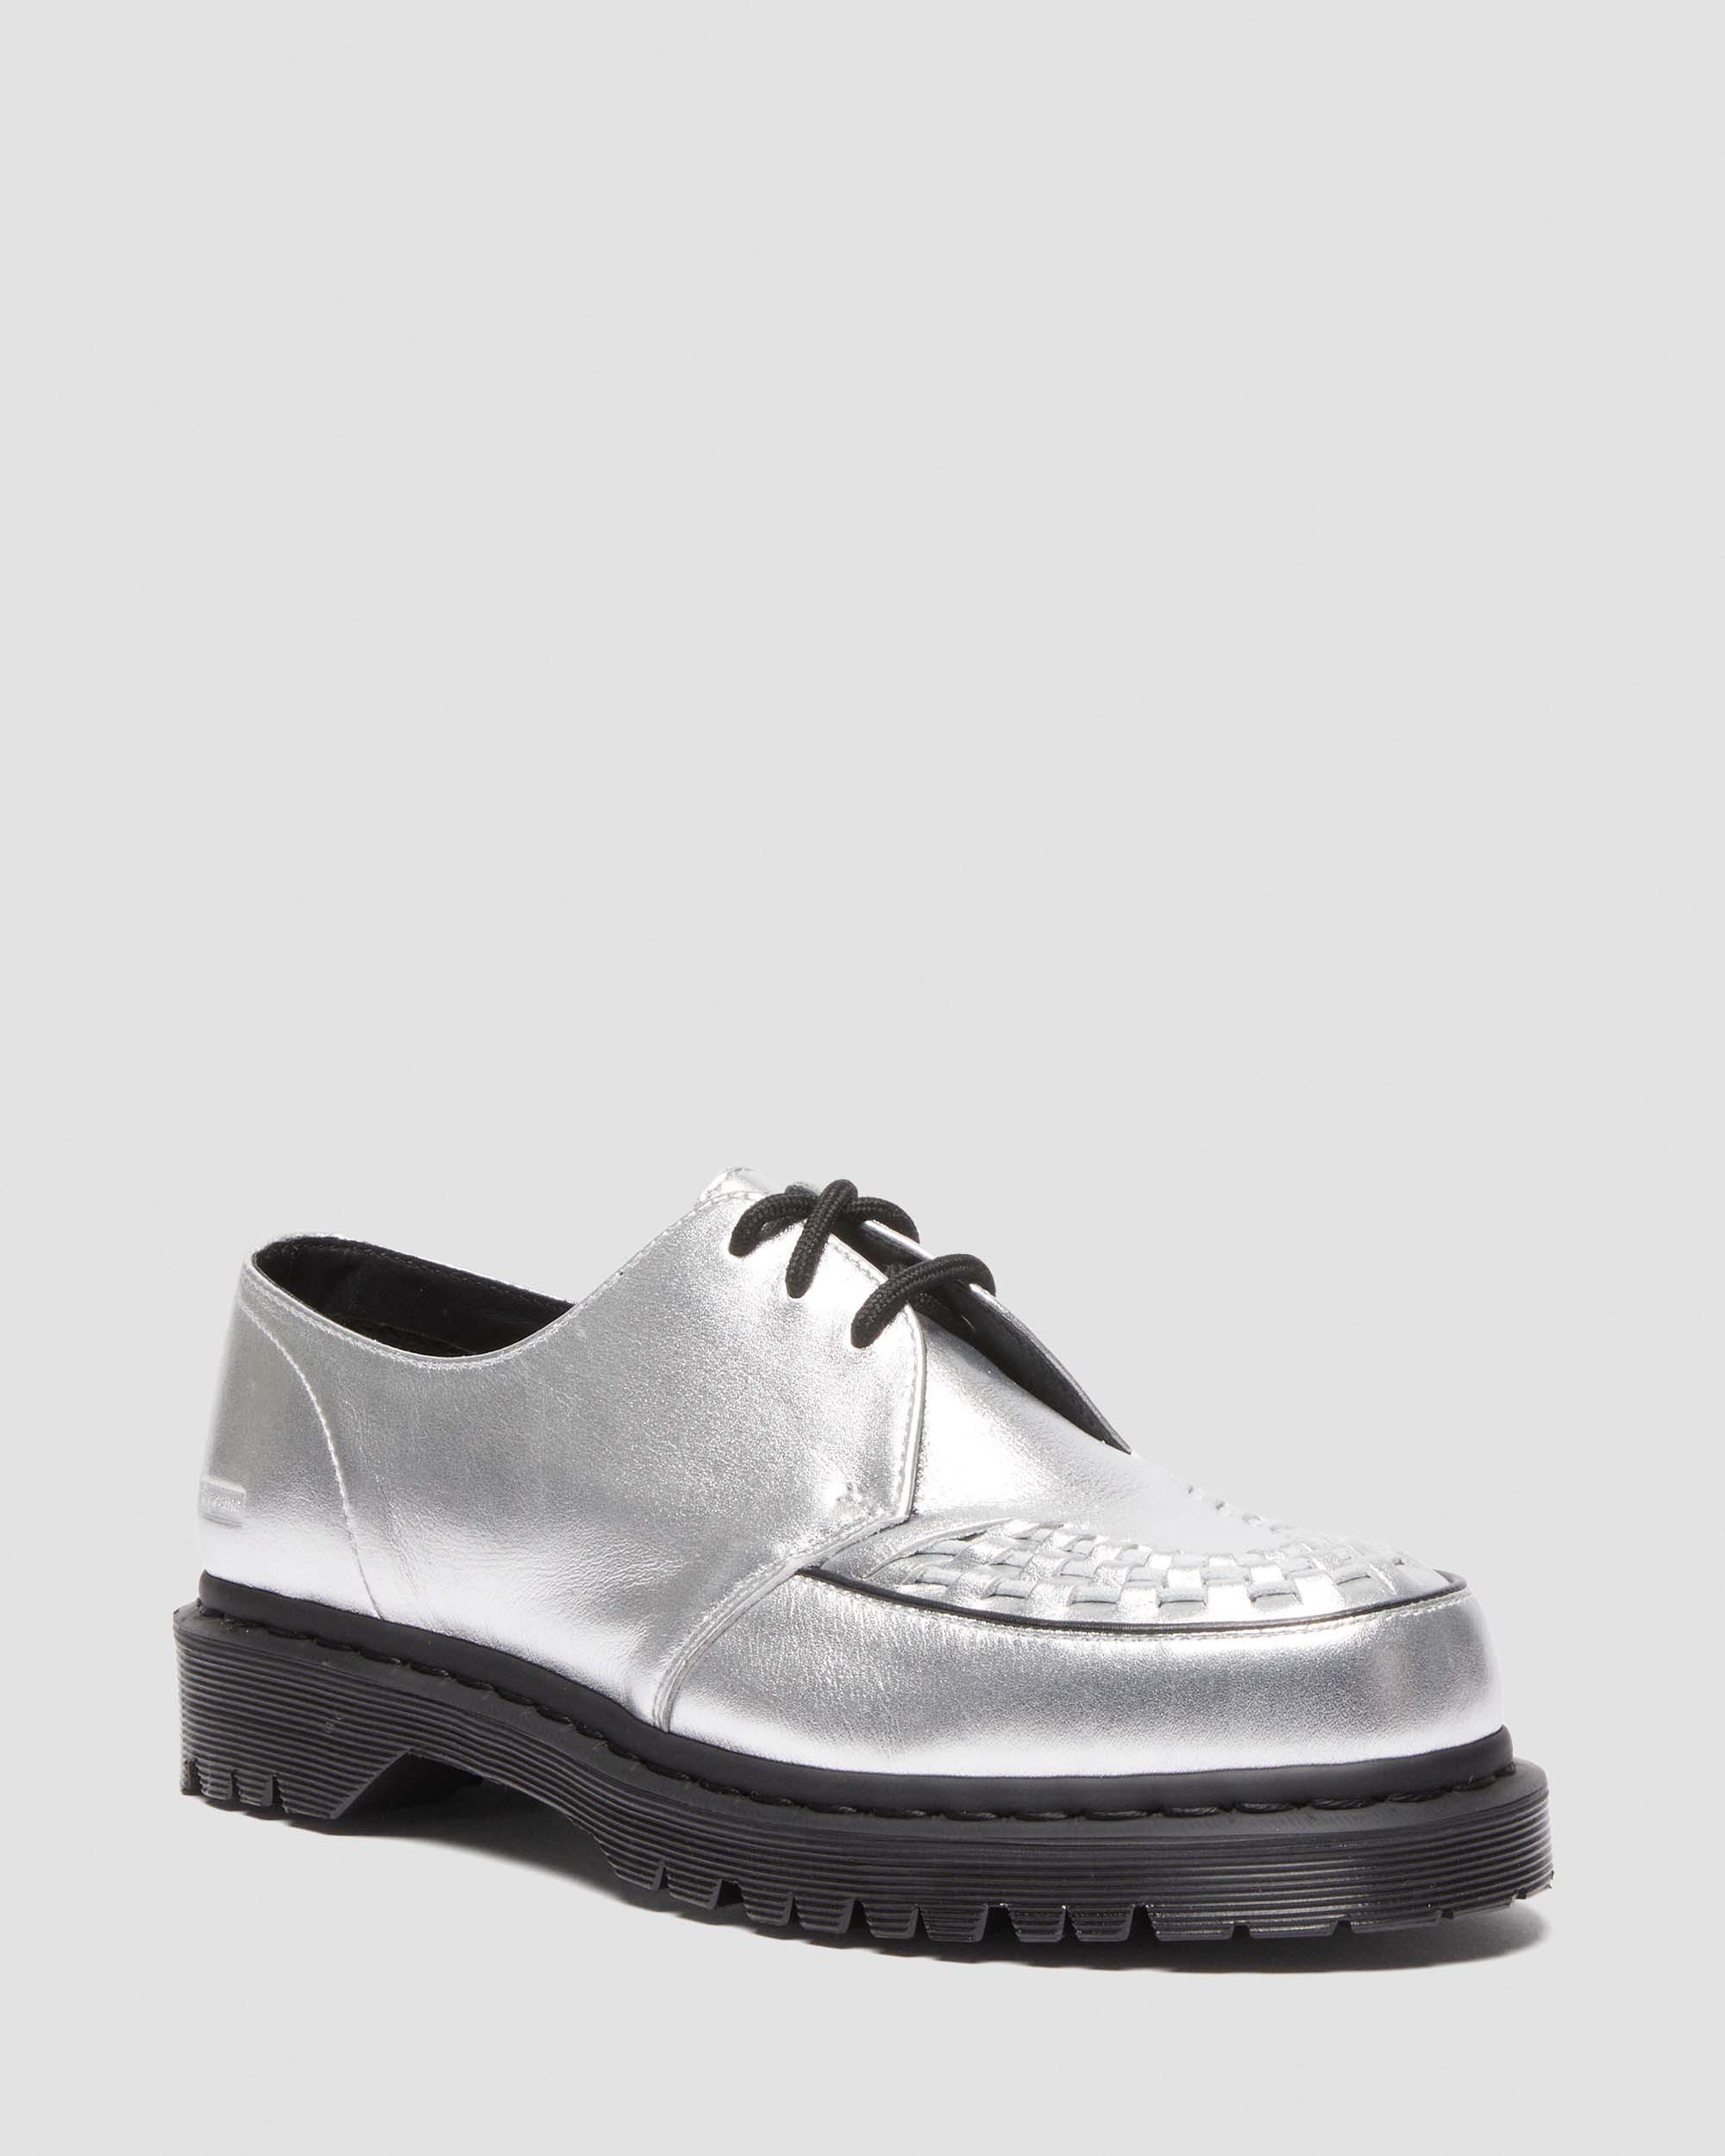 Ramsey Supreme Nappa Leather Creepers in Silver | Dr. Martens